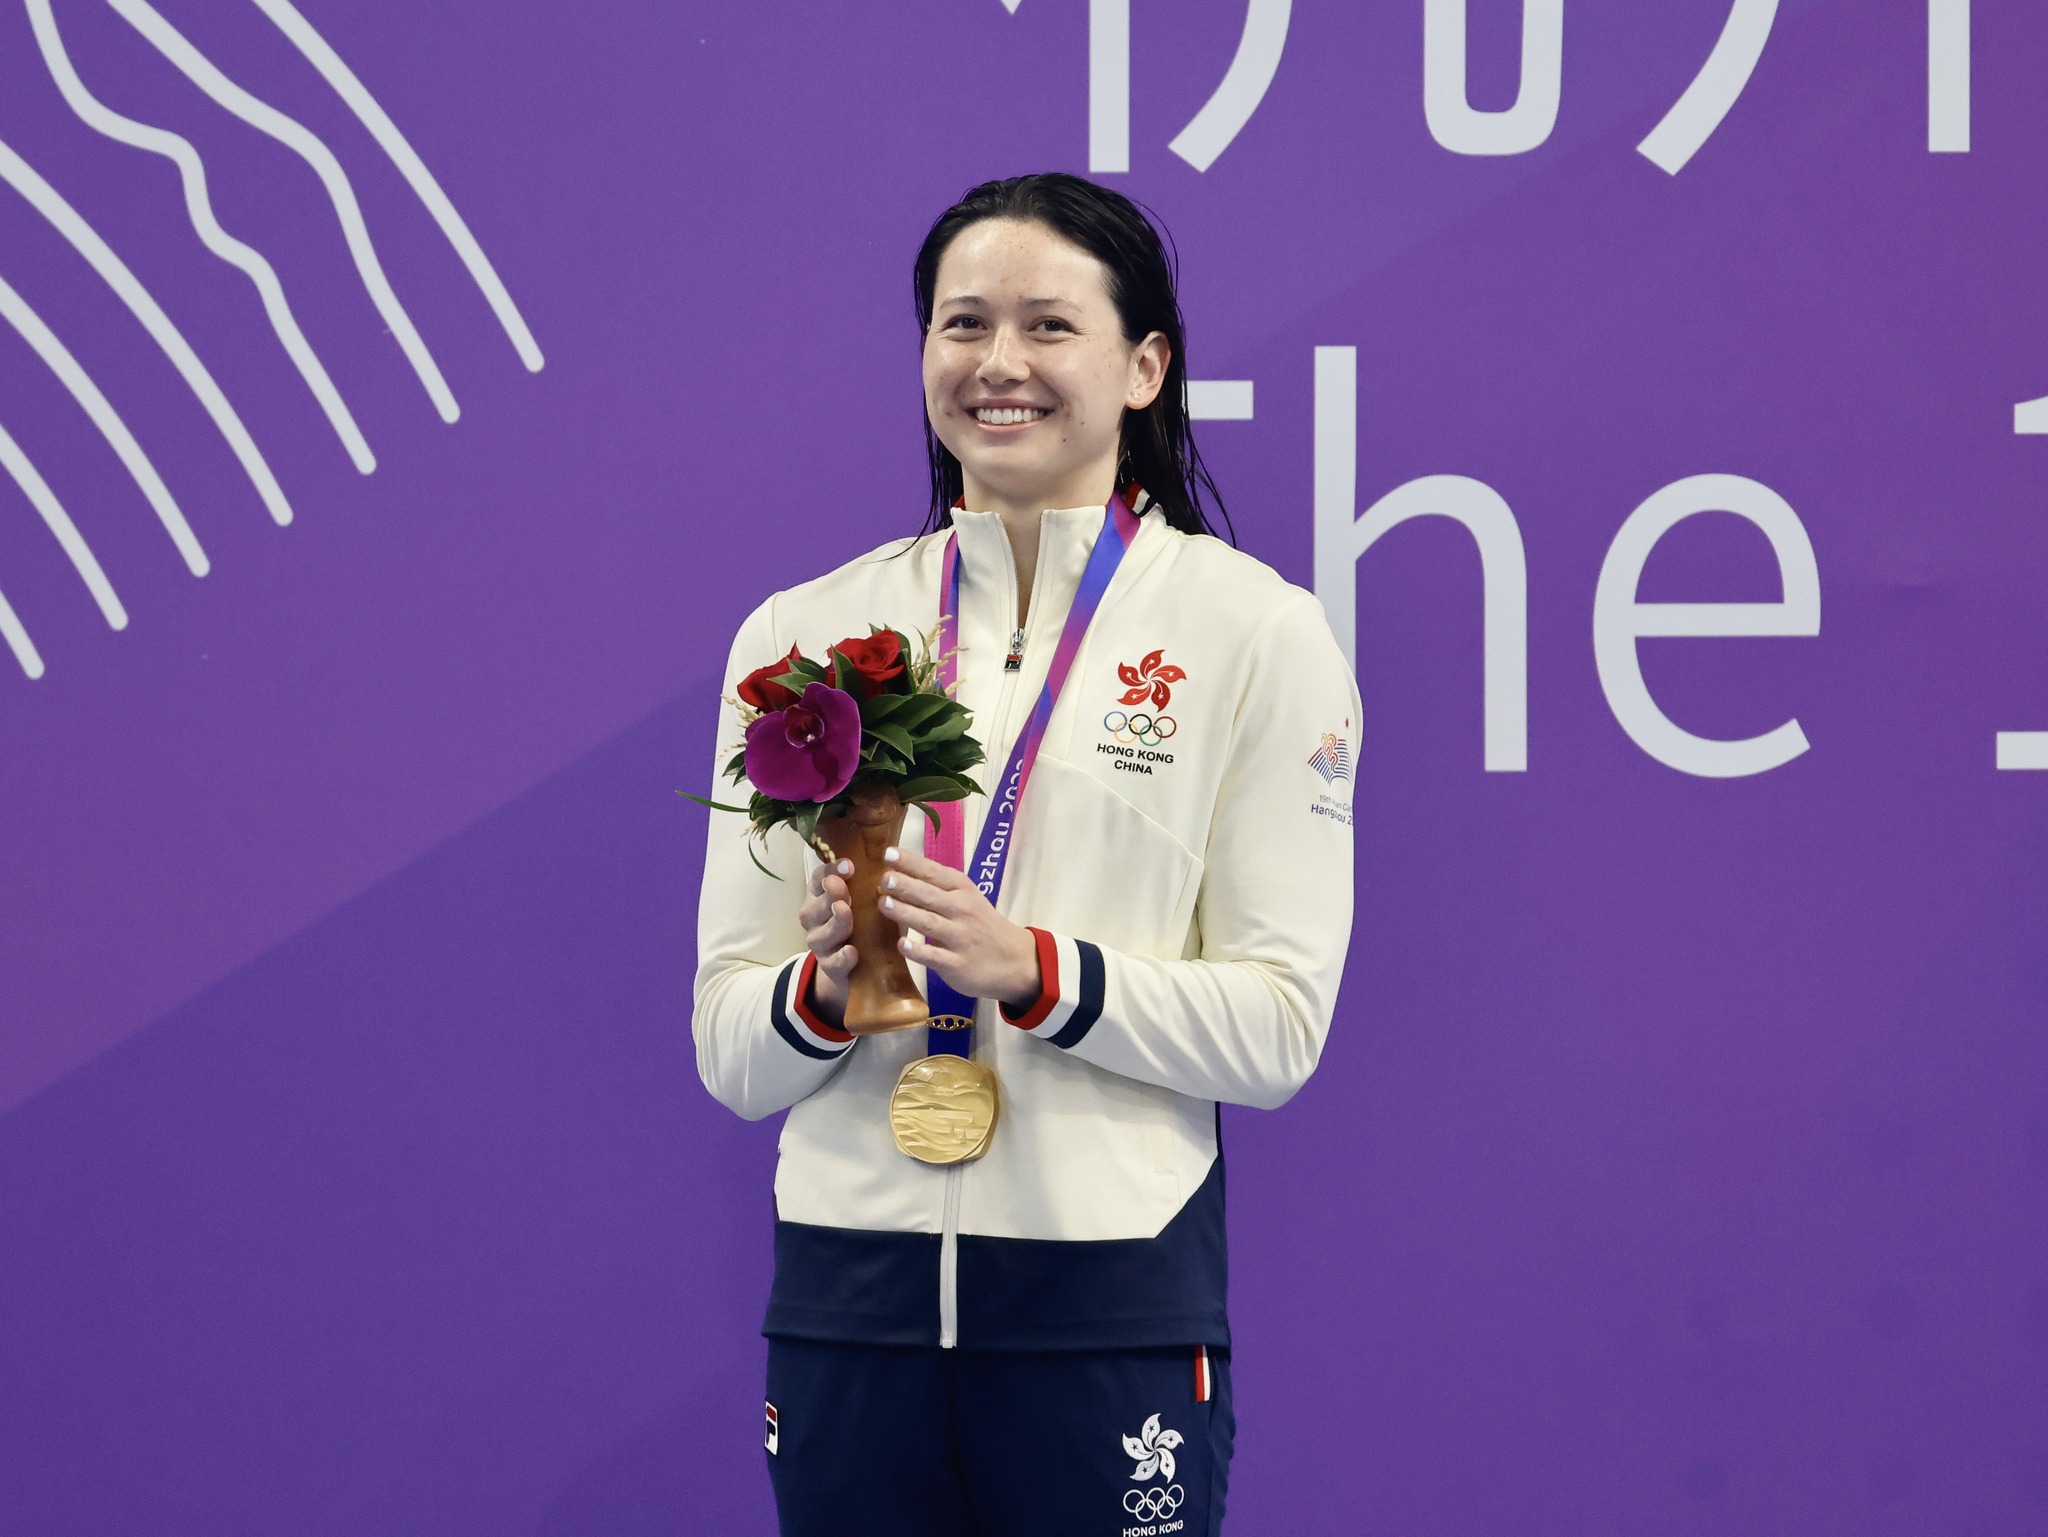 Siobhan Haughey finishes the race in 1:54.12, smashing the Asian Games record the 200m women's freestyle.